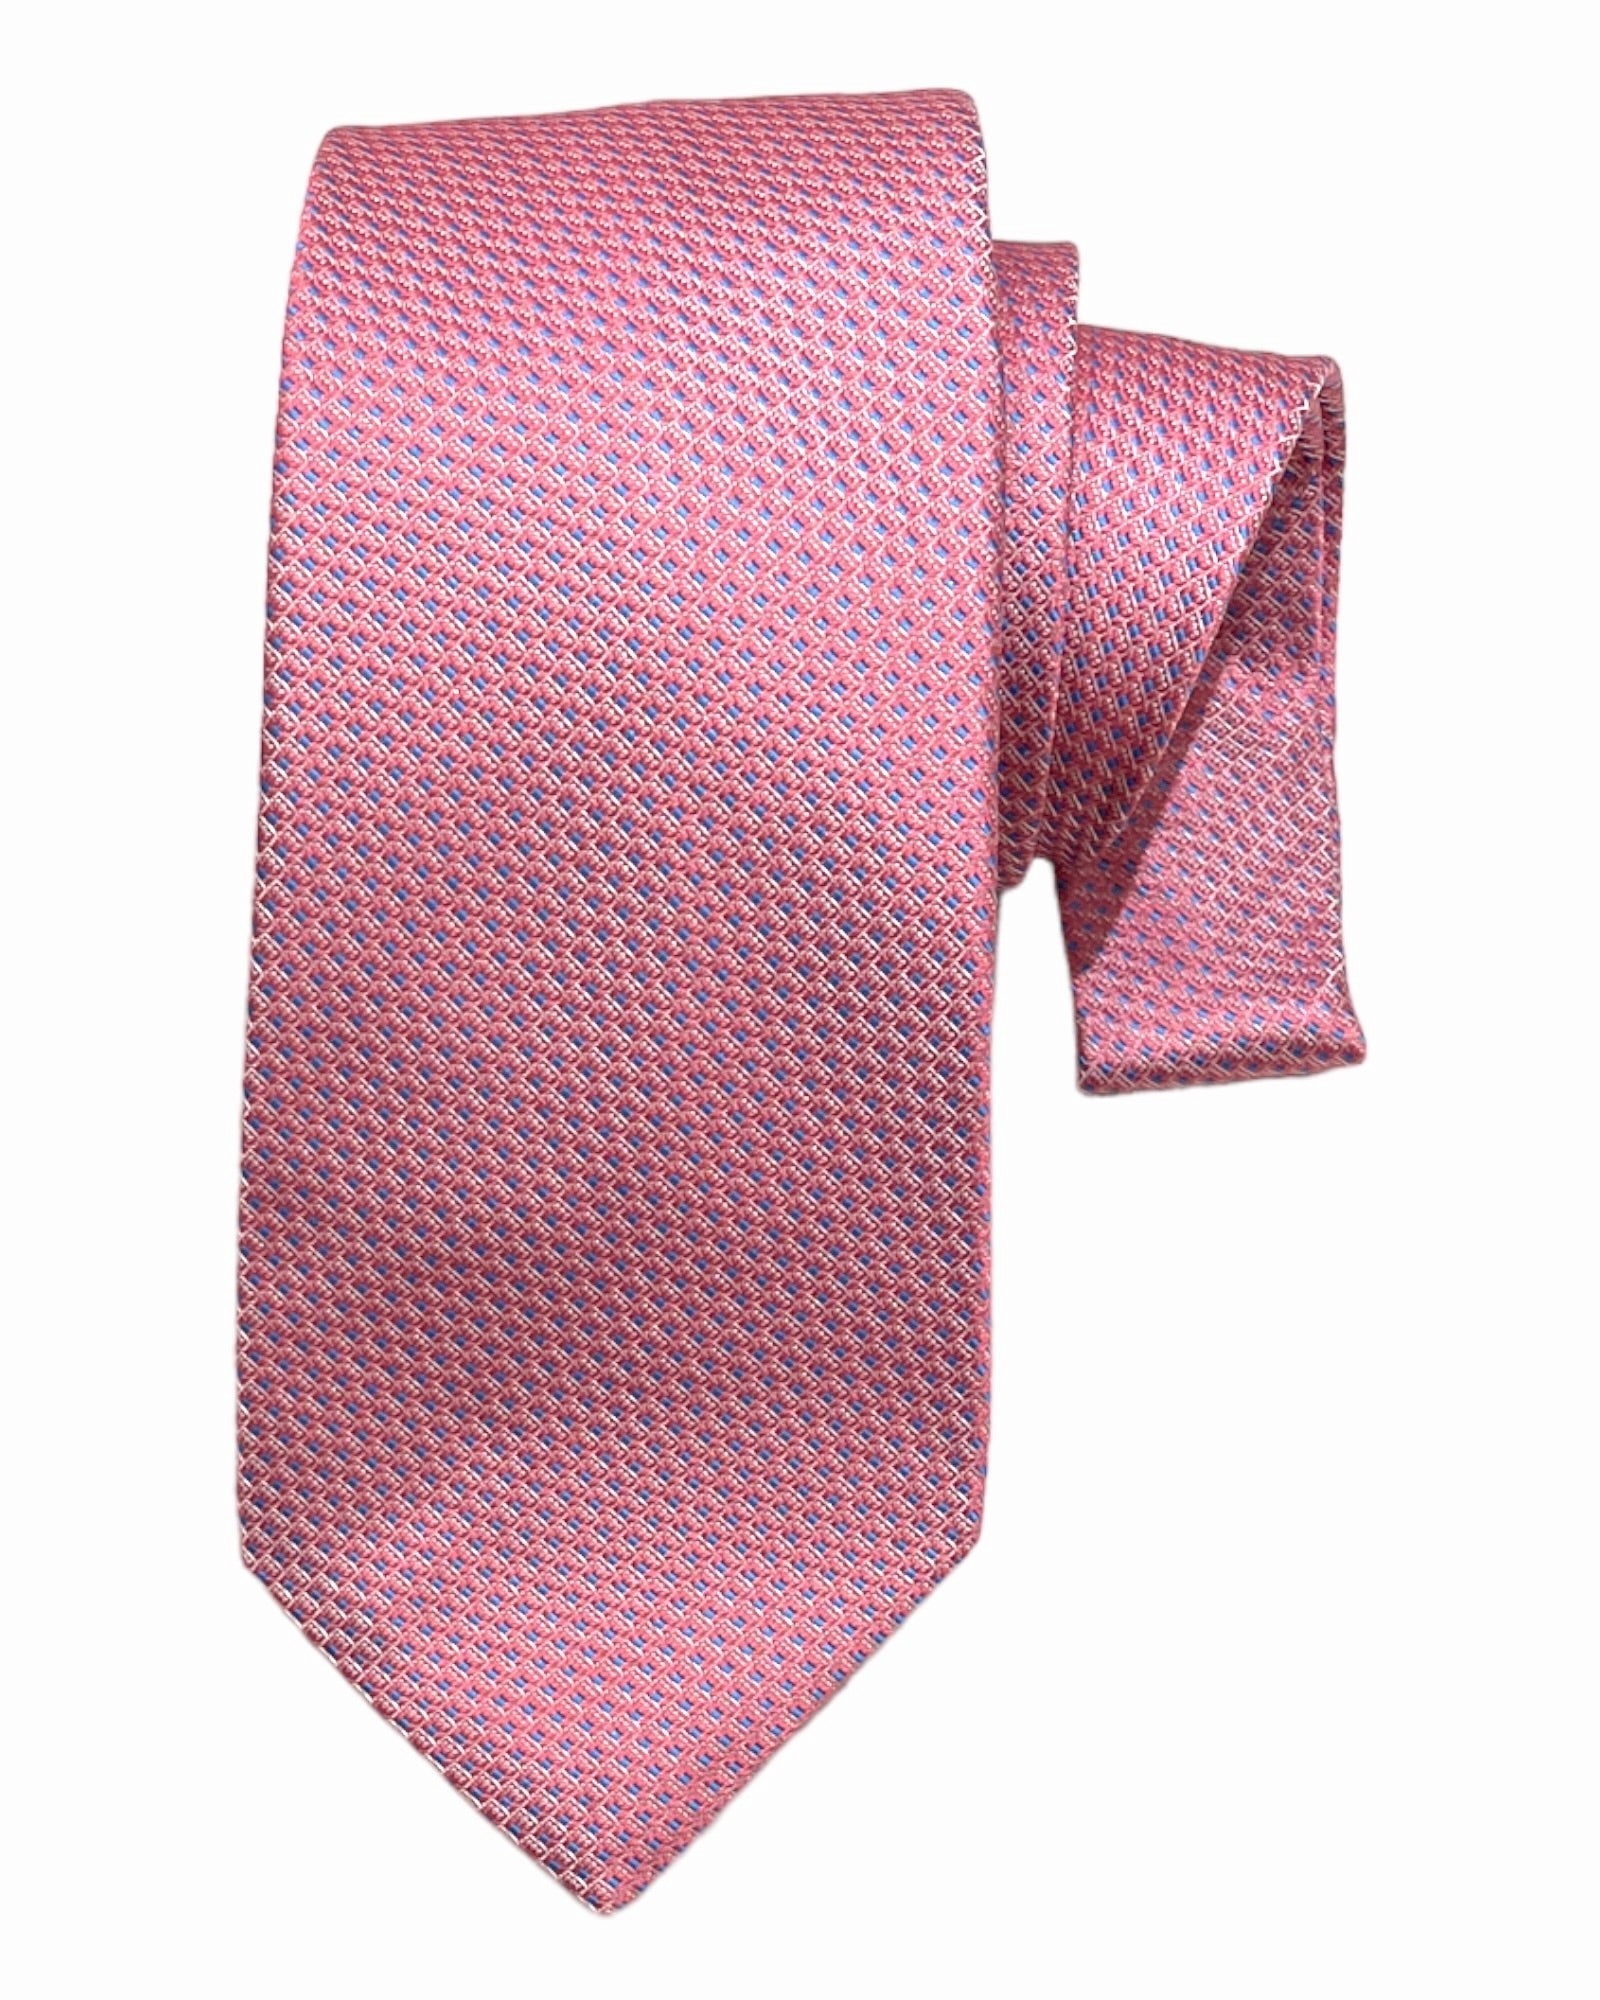 Seven-Fold Dotted Silk Ties TIESPink